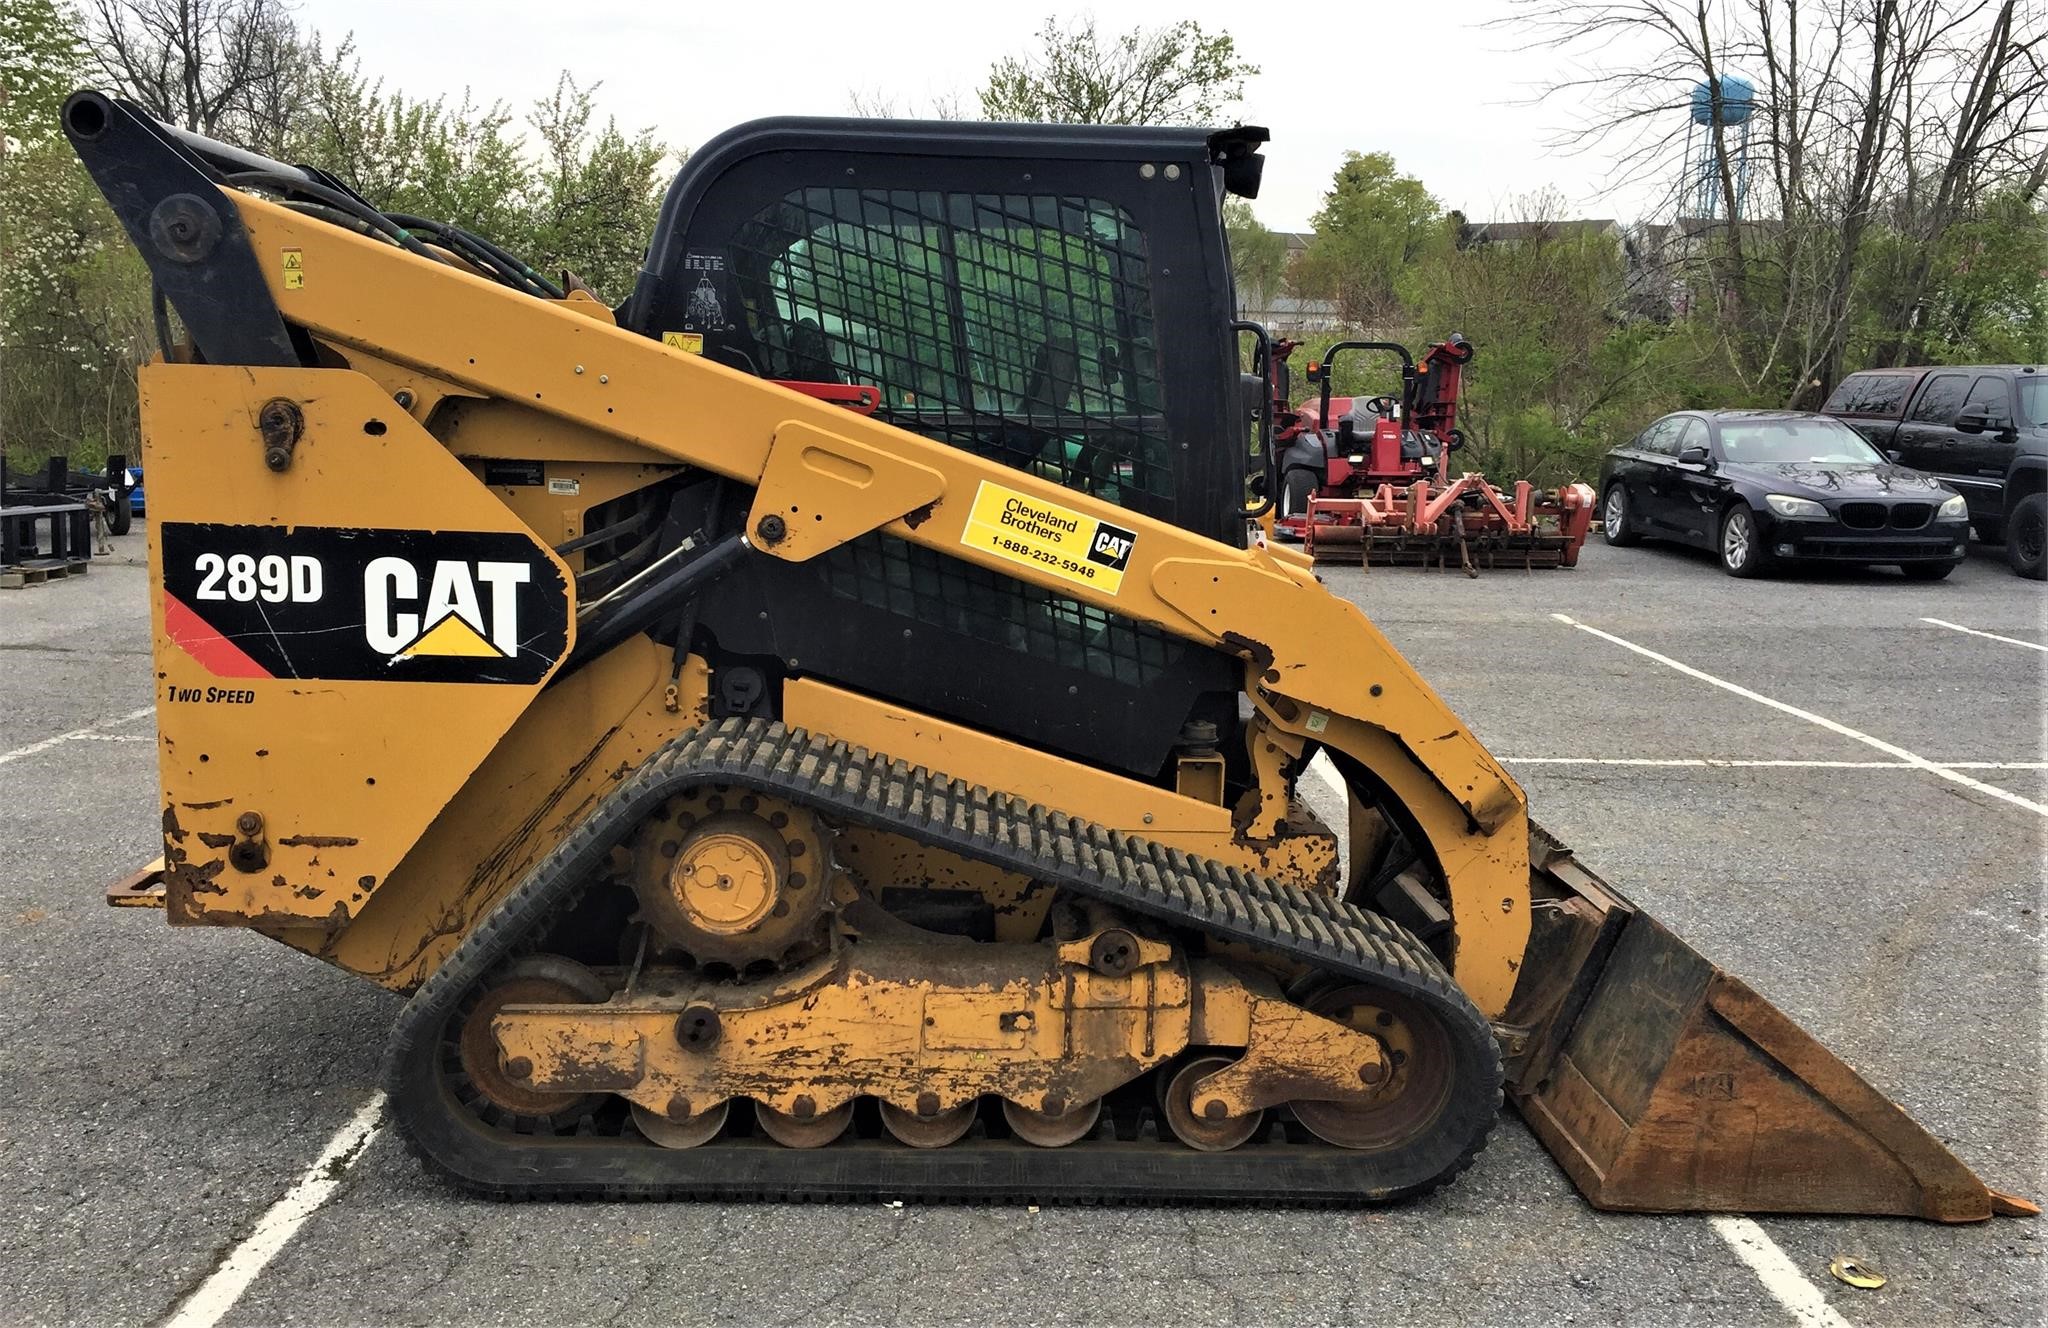 4/22/2021 Equipment, Tool & Building Supply Auction